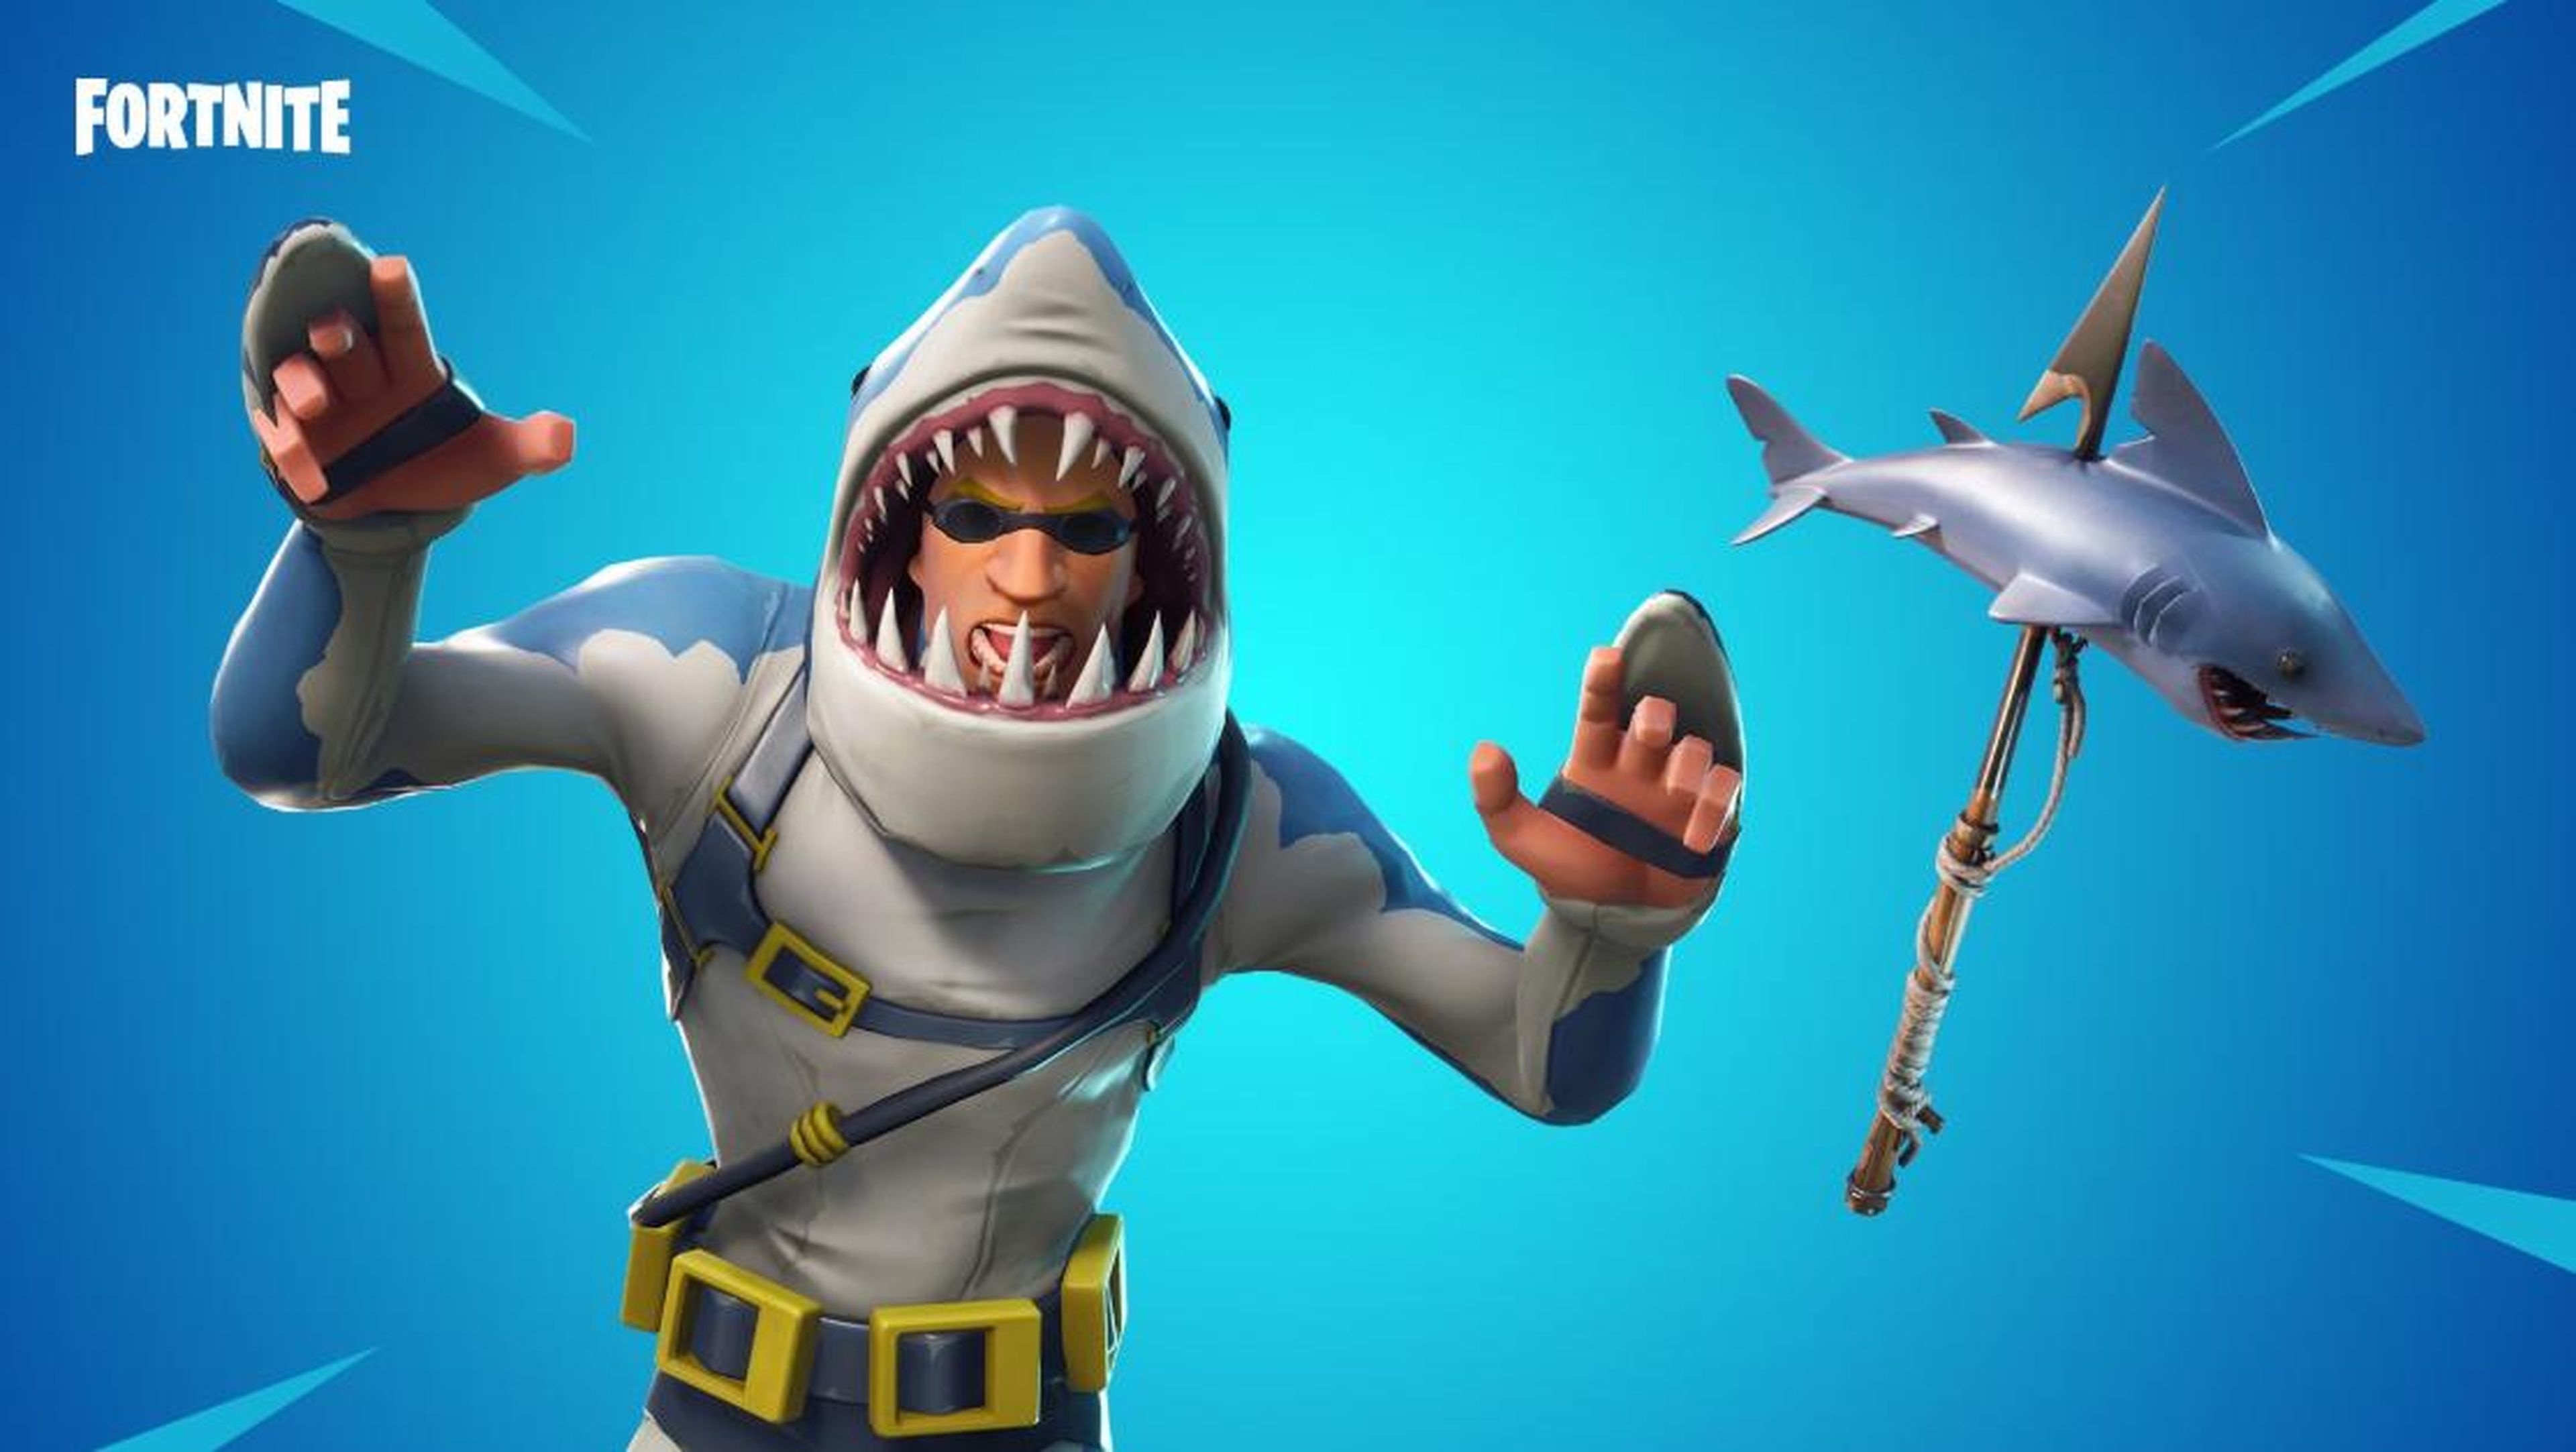 This week's update happens to fall on Shark Week, which creators at Epic Games have decided to celebrate with a fishy new skin and pick-axe.